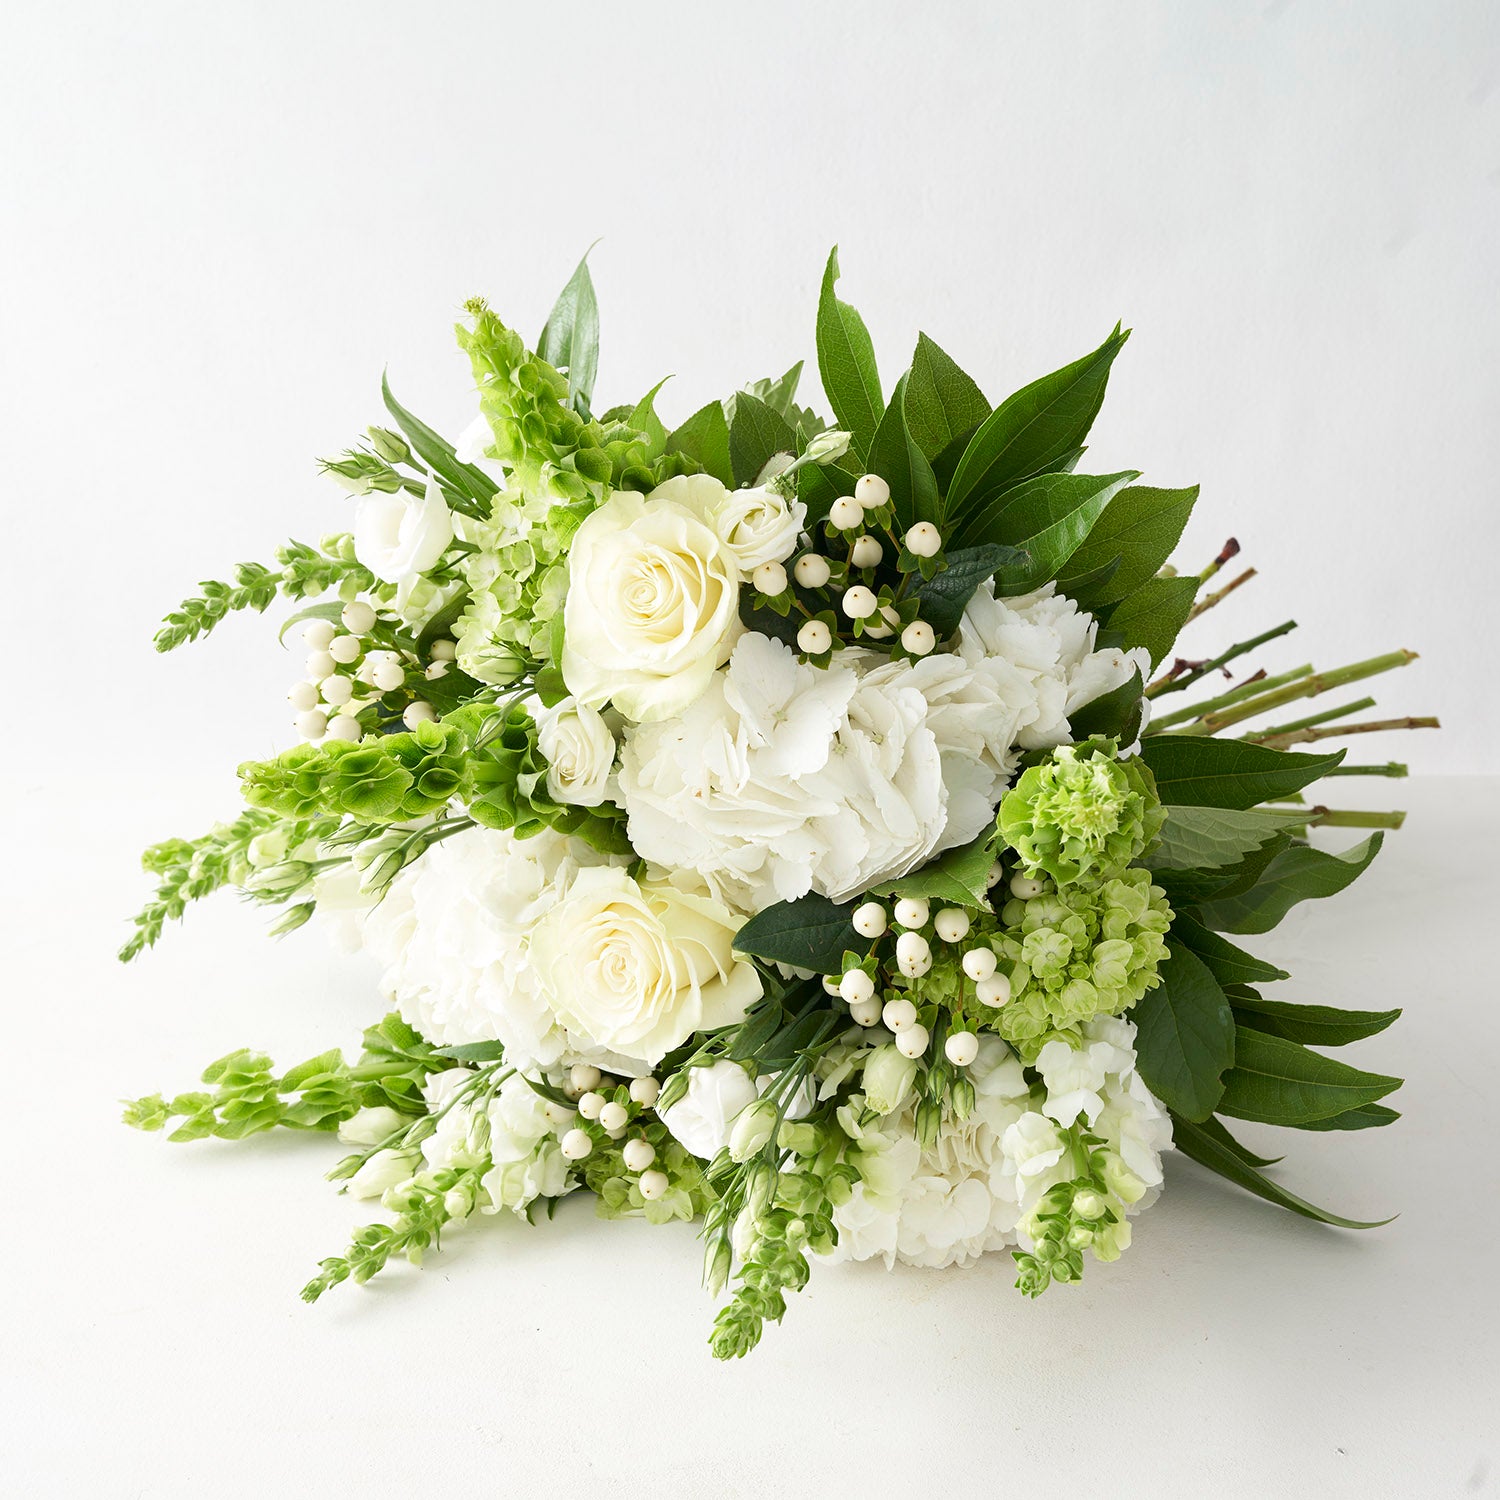 A round white and green bouquet including white roses, white and green hydrangea, and white snapdragons  laying on white background.